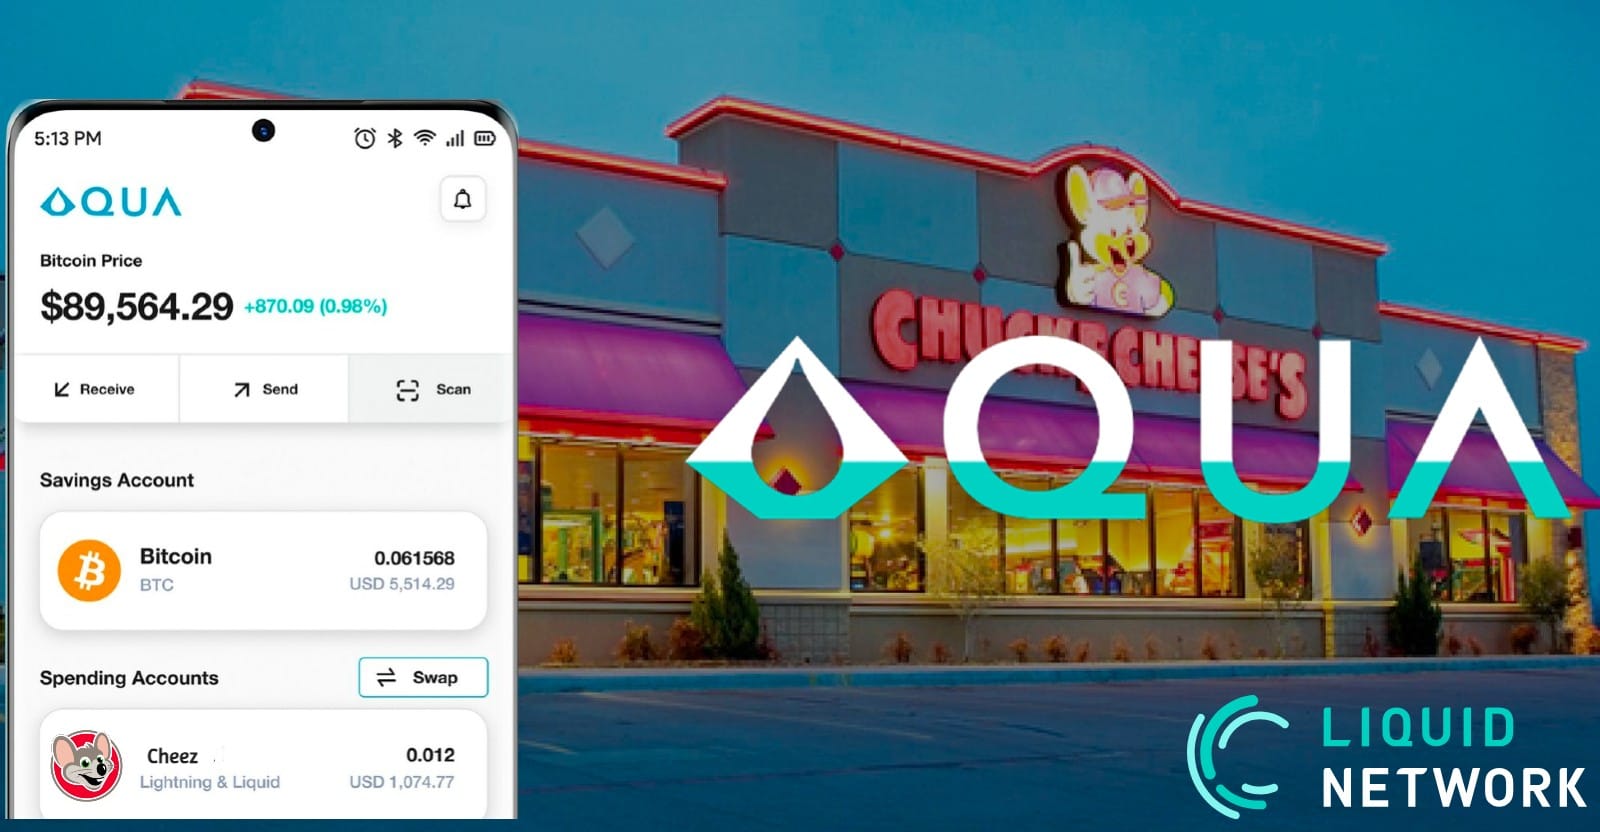 AQUA Launches Chuck E. Cheese Token On Liquid To Attract Younger Users